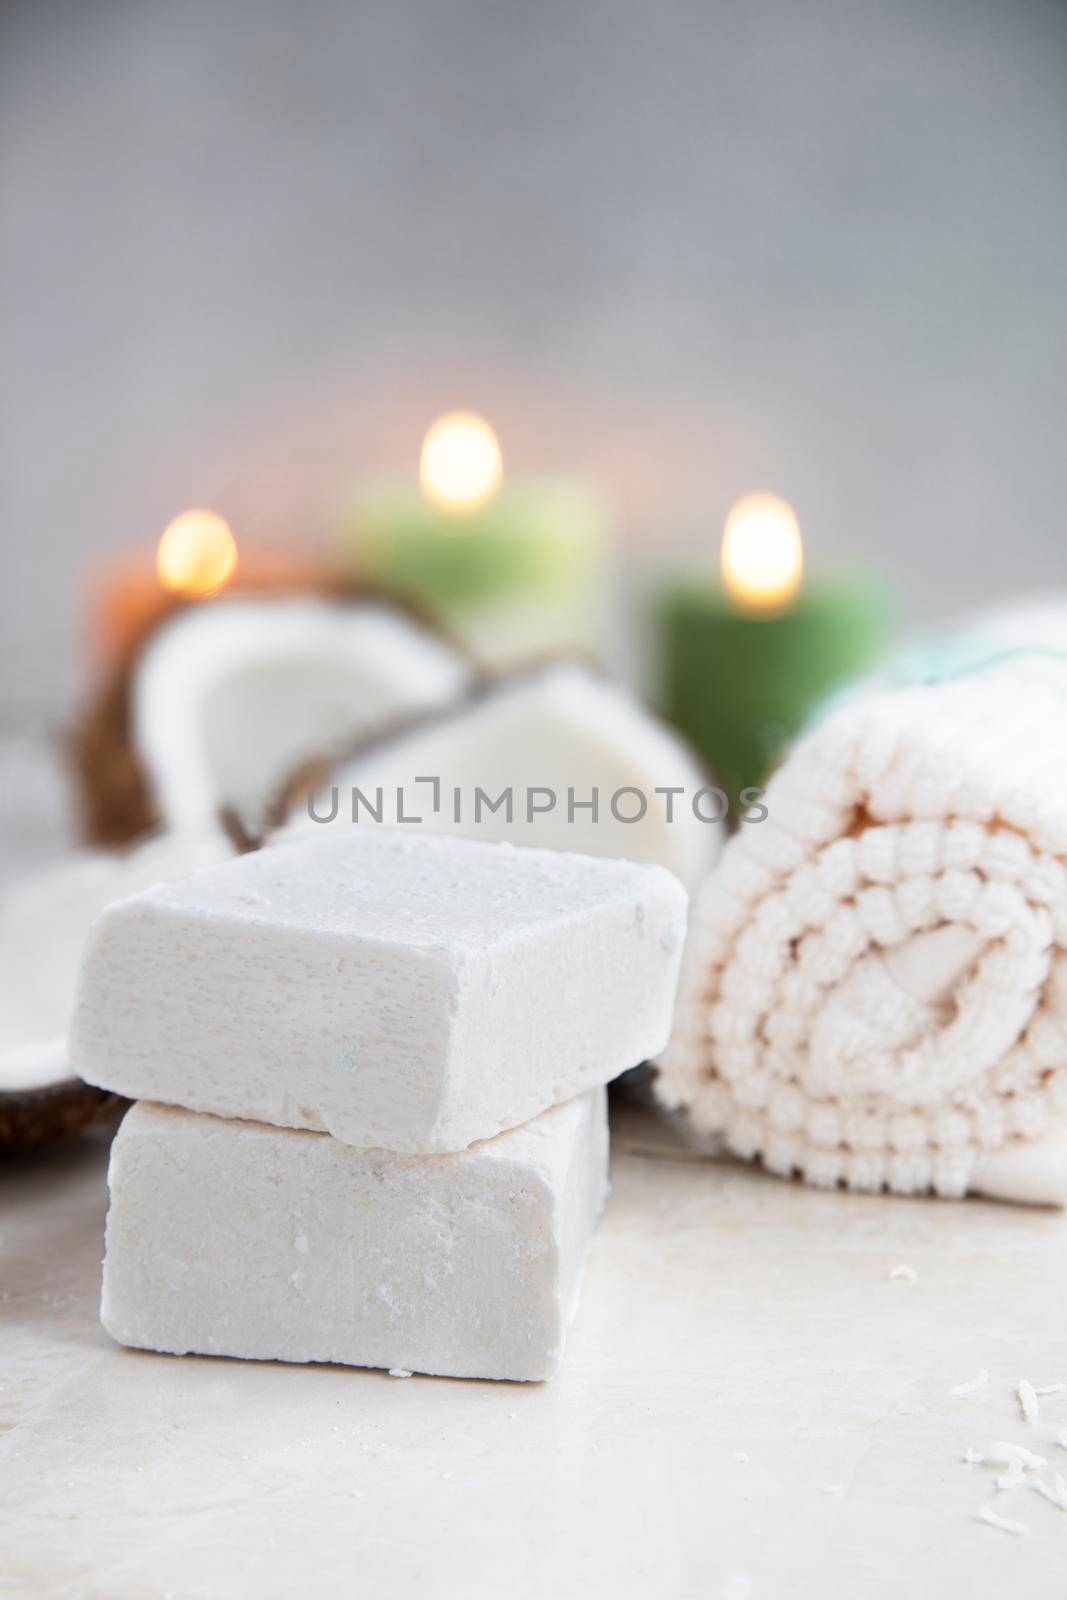 Coconut soap with towels and candles for a relaxing spa experience.